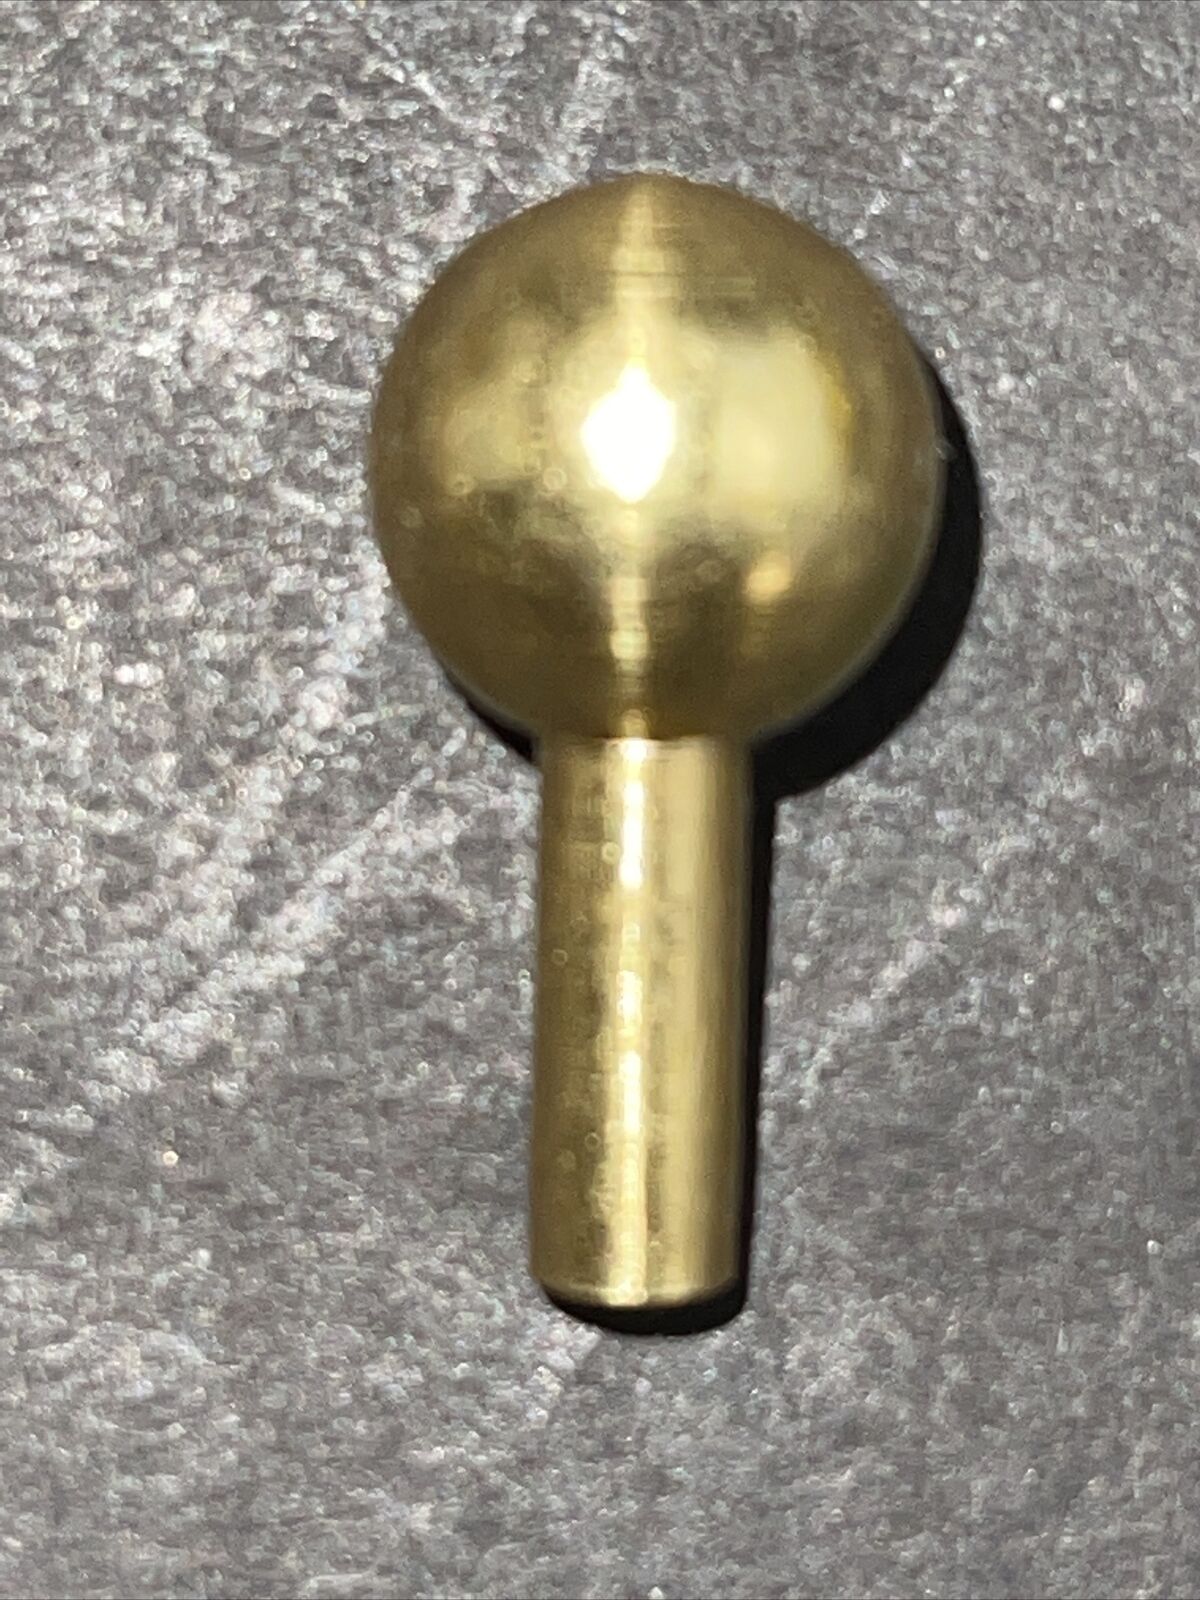 1/2 SOLID BRASS BALL WITH A 6/32 F THREADED 1/2 LONG STEM LOT OF 6 PCS